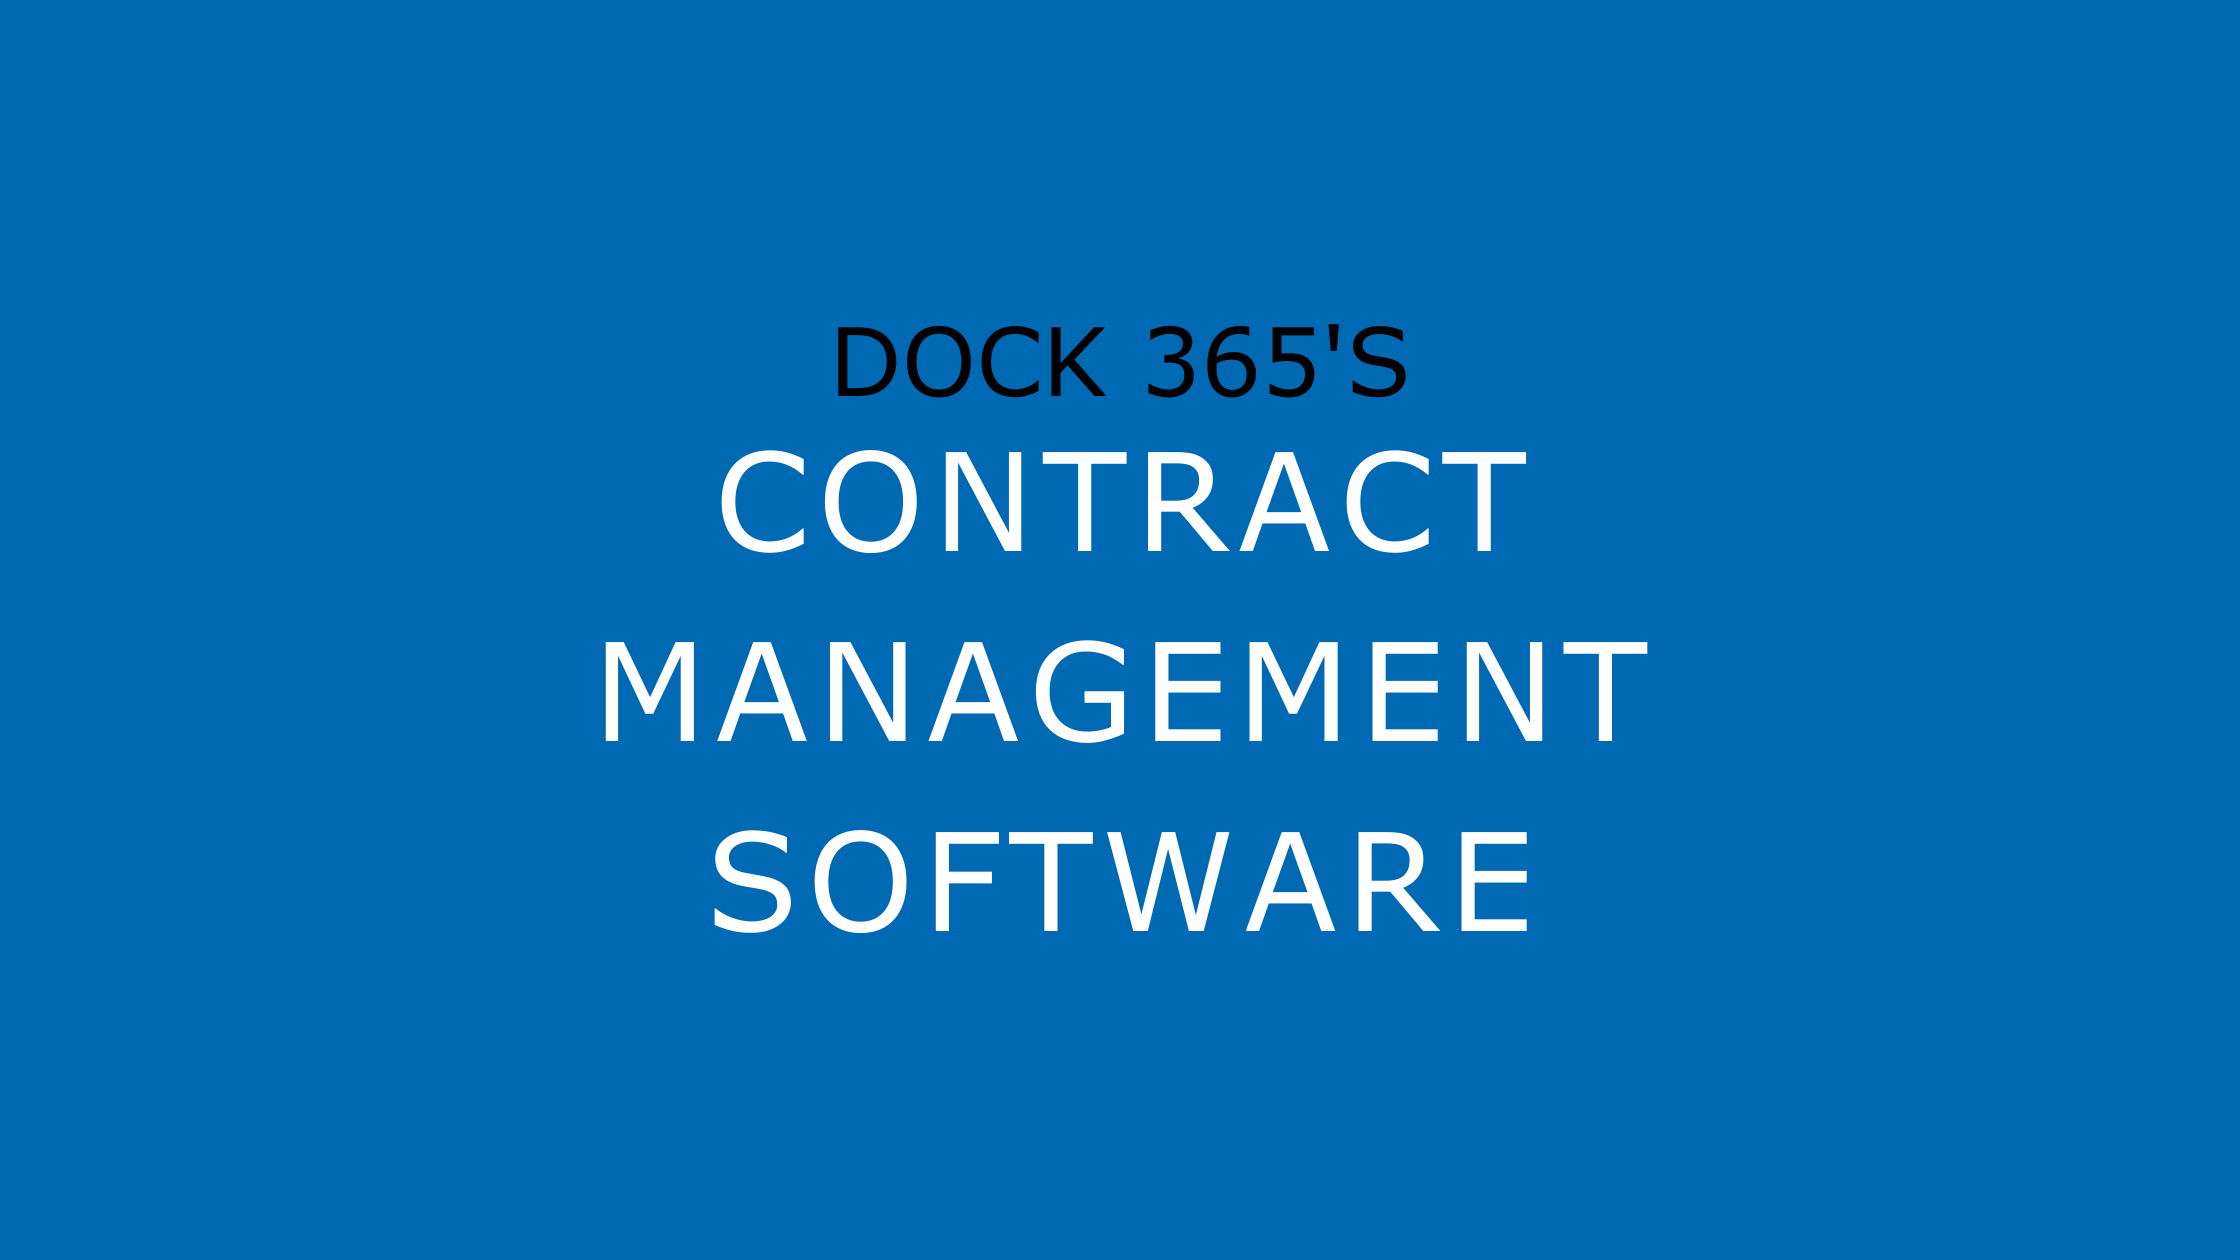 Contract Management Software | CLM | Dock 365 Inc.